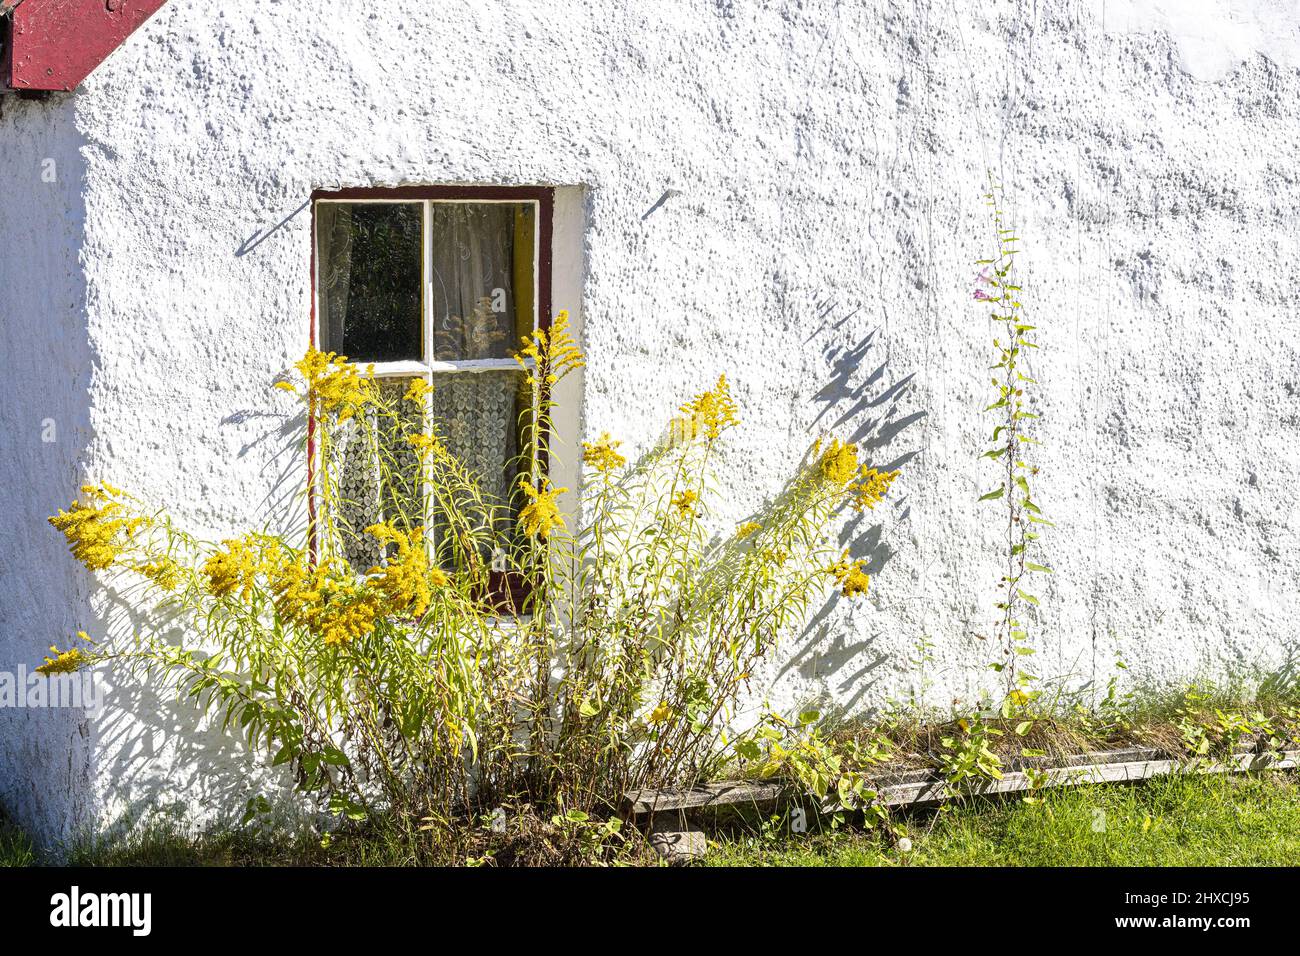 Golden Rod flowering outside the window of a cottage in the village of Carrbridge, Highland, Scotland UK. Stock Photo